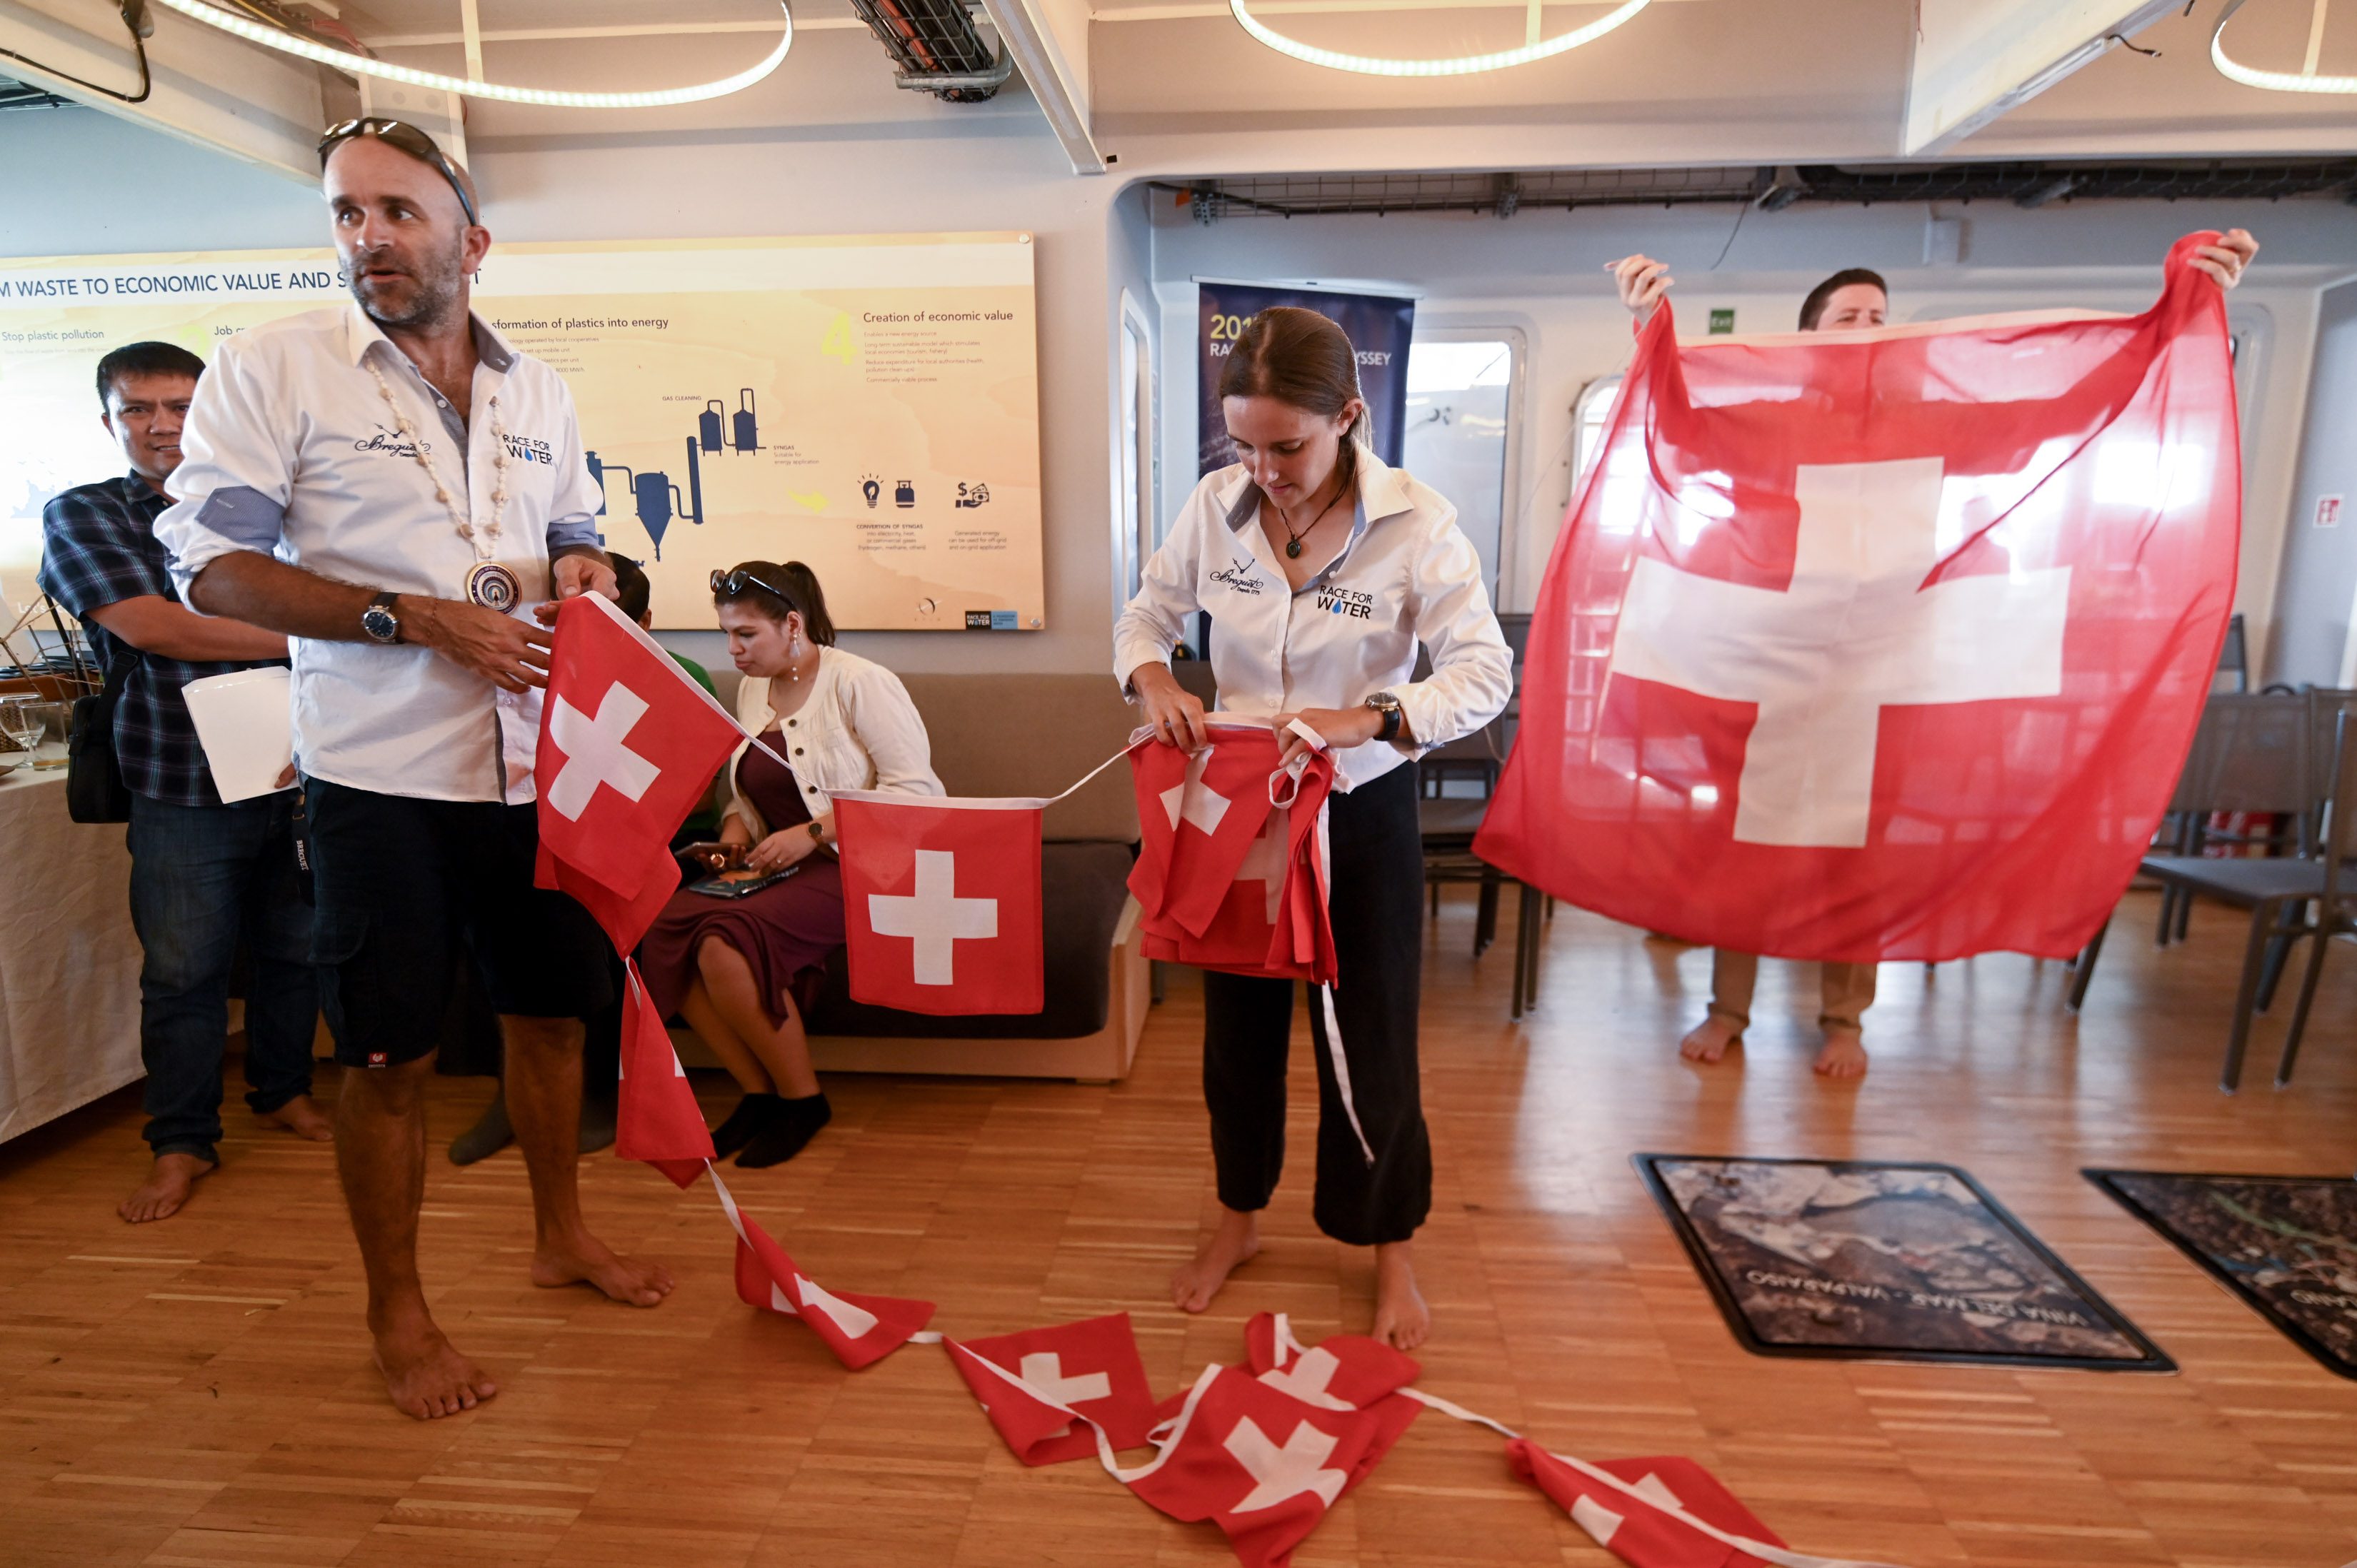 CLEANUP. Crew members tidy the lobby and folds the Swiss flag neatly until the next event. Photo by Alecs Ongcal/Rappler   